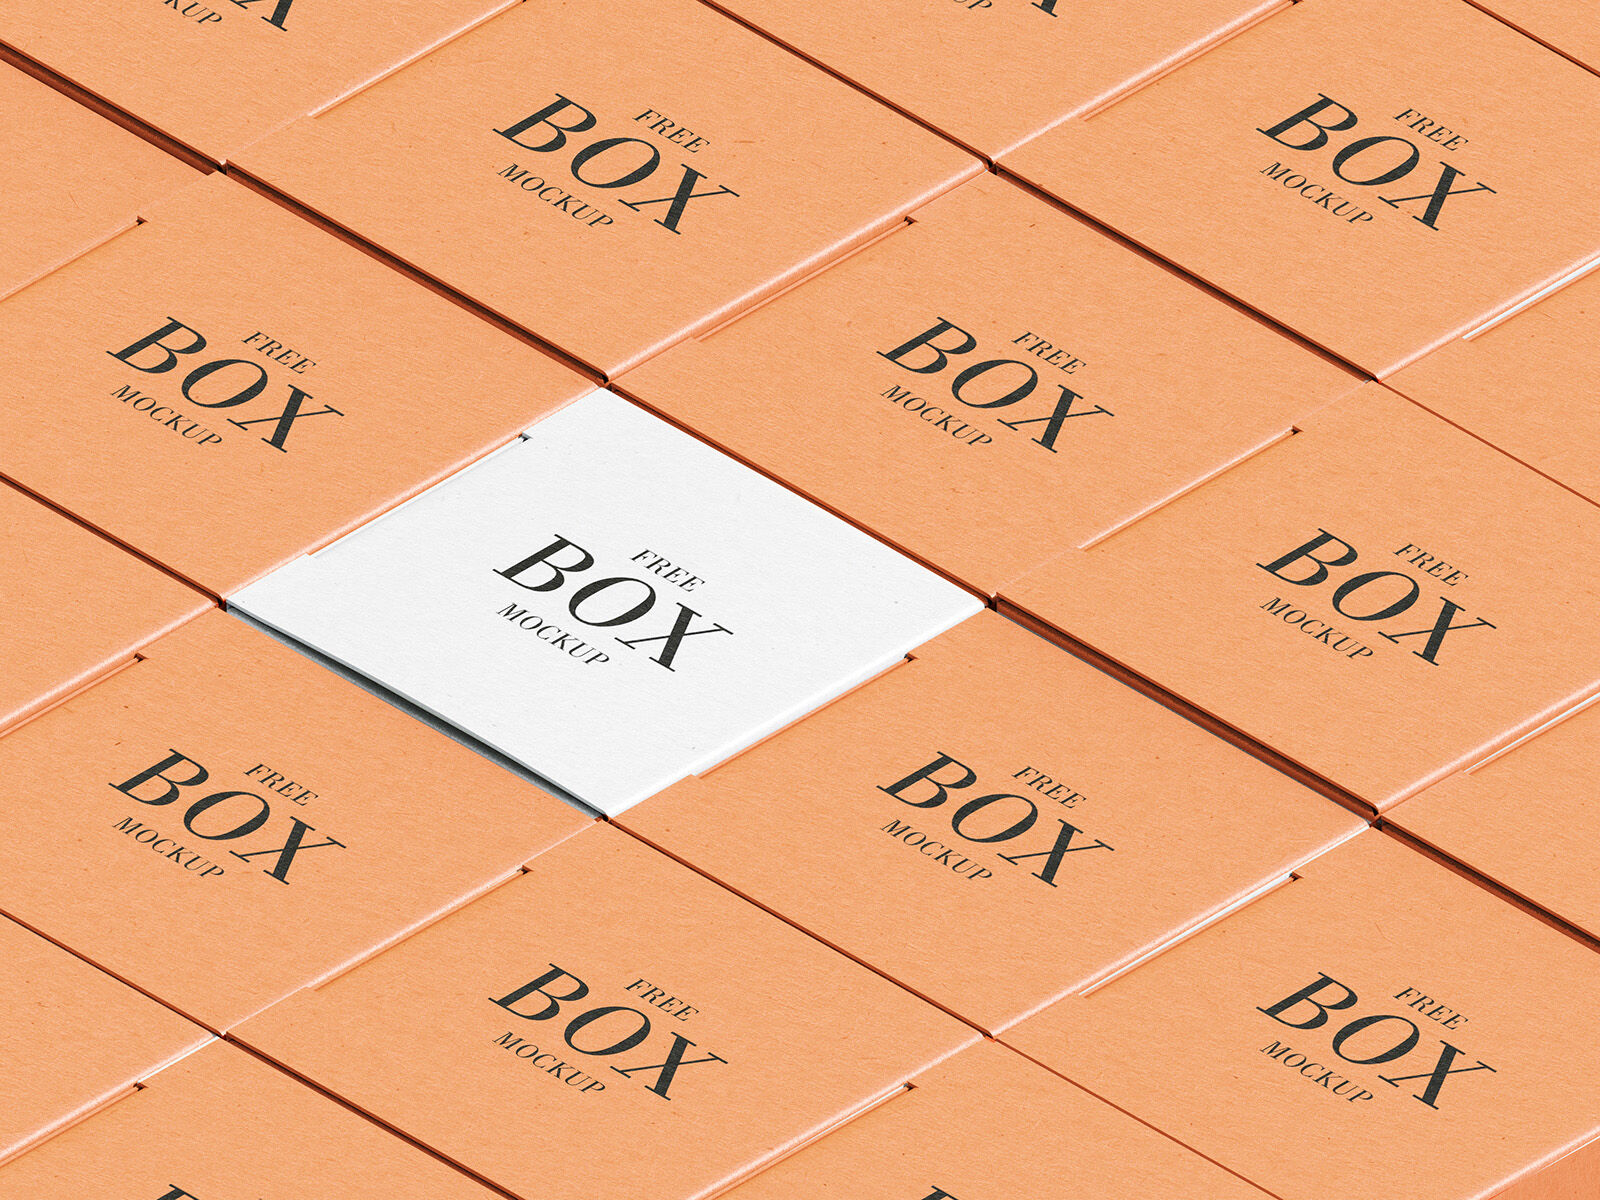 6 Mockups of Packaging Boxes in Grid Layout FREE PSD